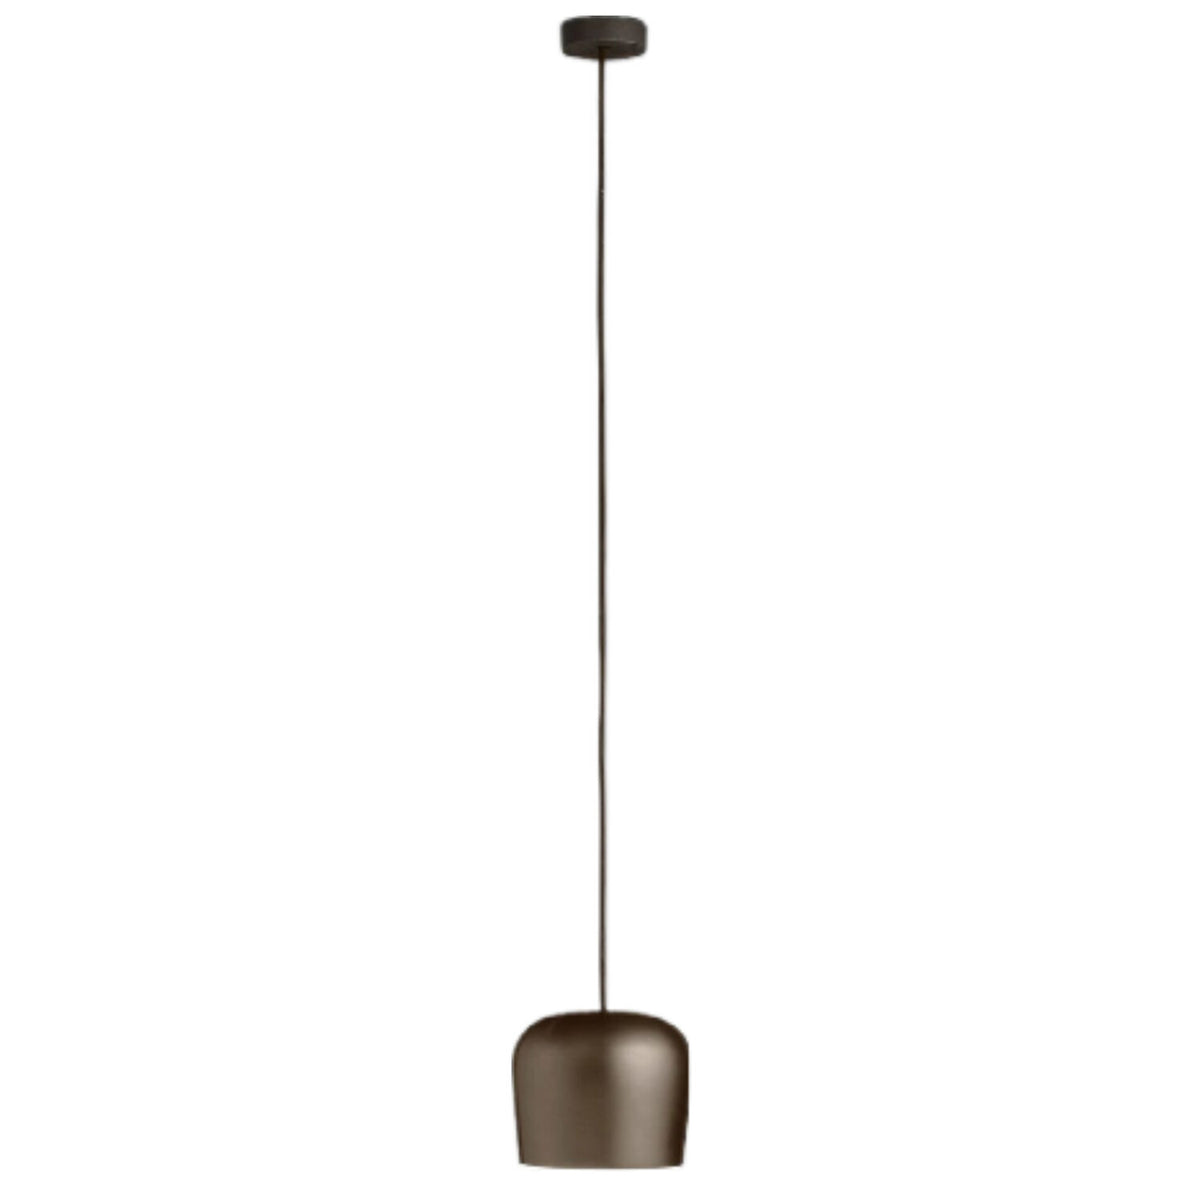 AIM SMALL (FIXED VERSION) - LED PENDANT LIGHT BY RONAN AND ERWAN BOUROULLEC